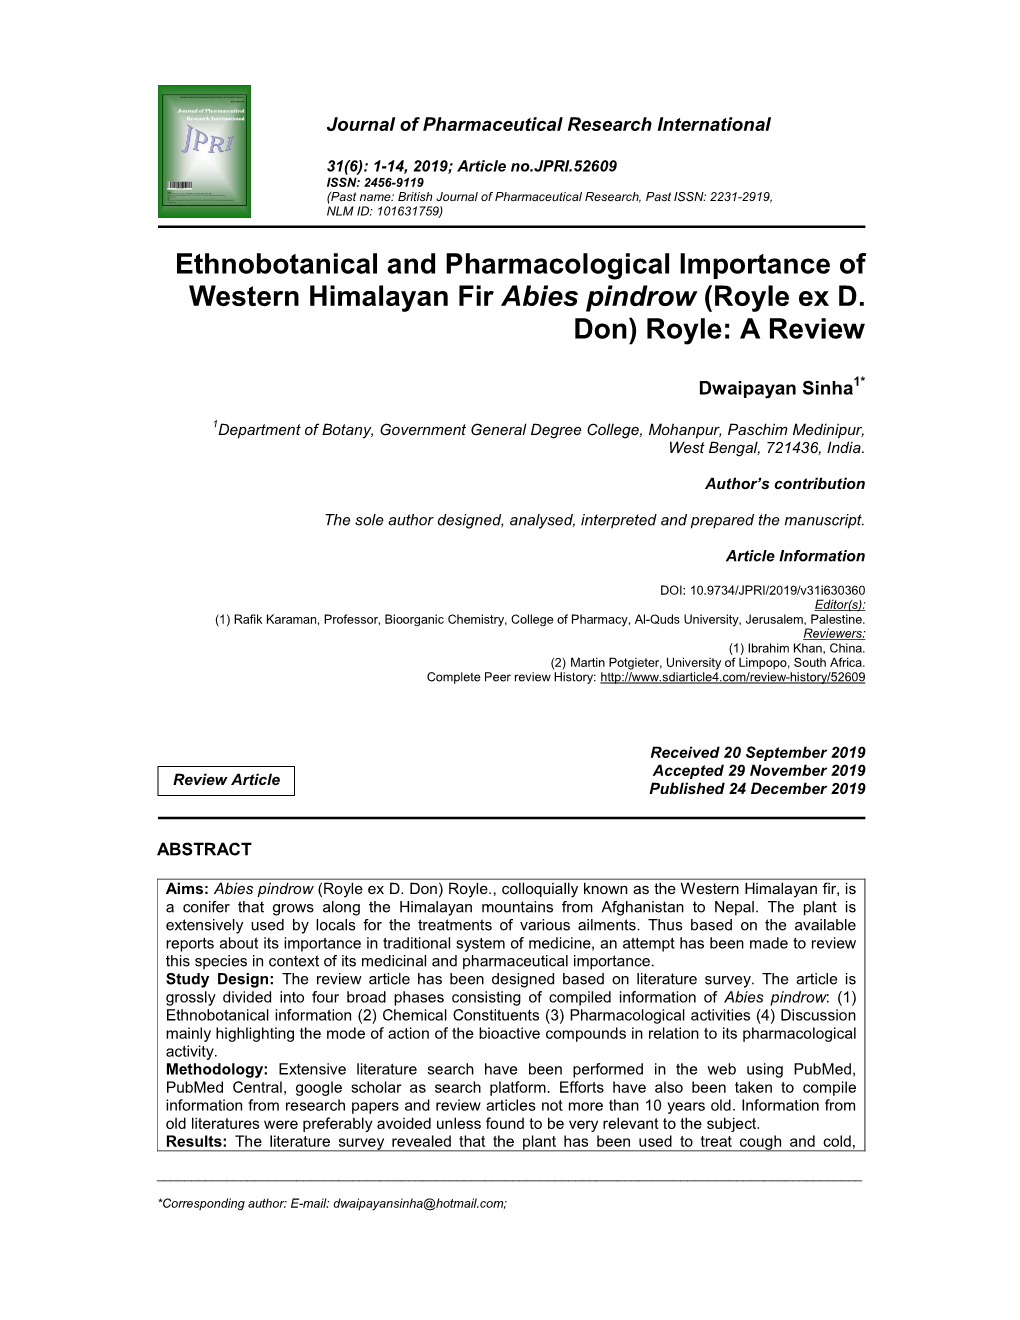 Ethnobotanical and Pharmacological Importance of Western Himalayan Fir Abies Pindrow (Royle Ex D